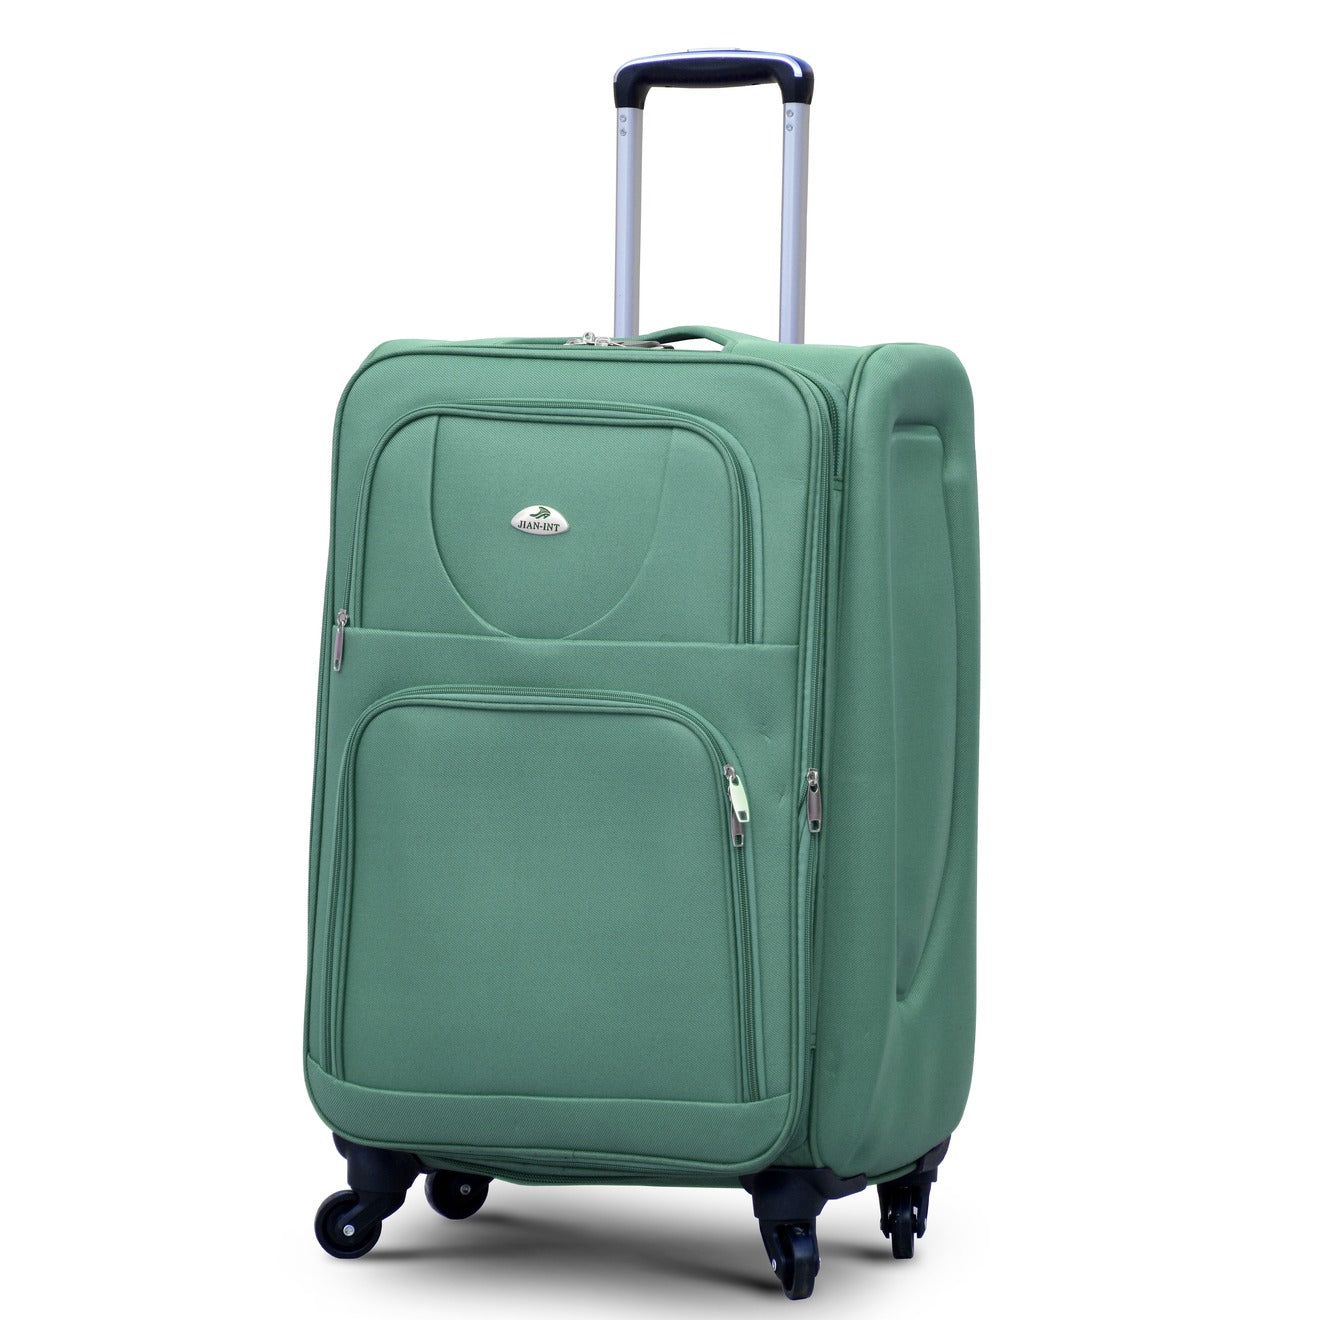 Soft Material Luggage | Soft Shell | Lightweight | 10 Kg - 20 Inches 4 Wheels | 2 Years Warranty | Jian 4 Wheel Green